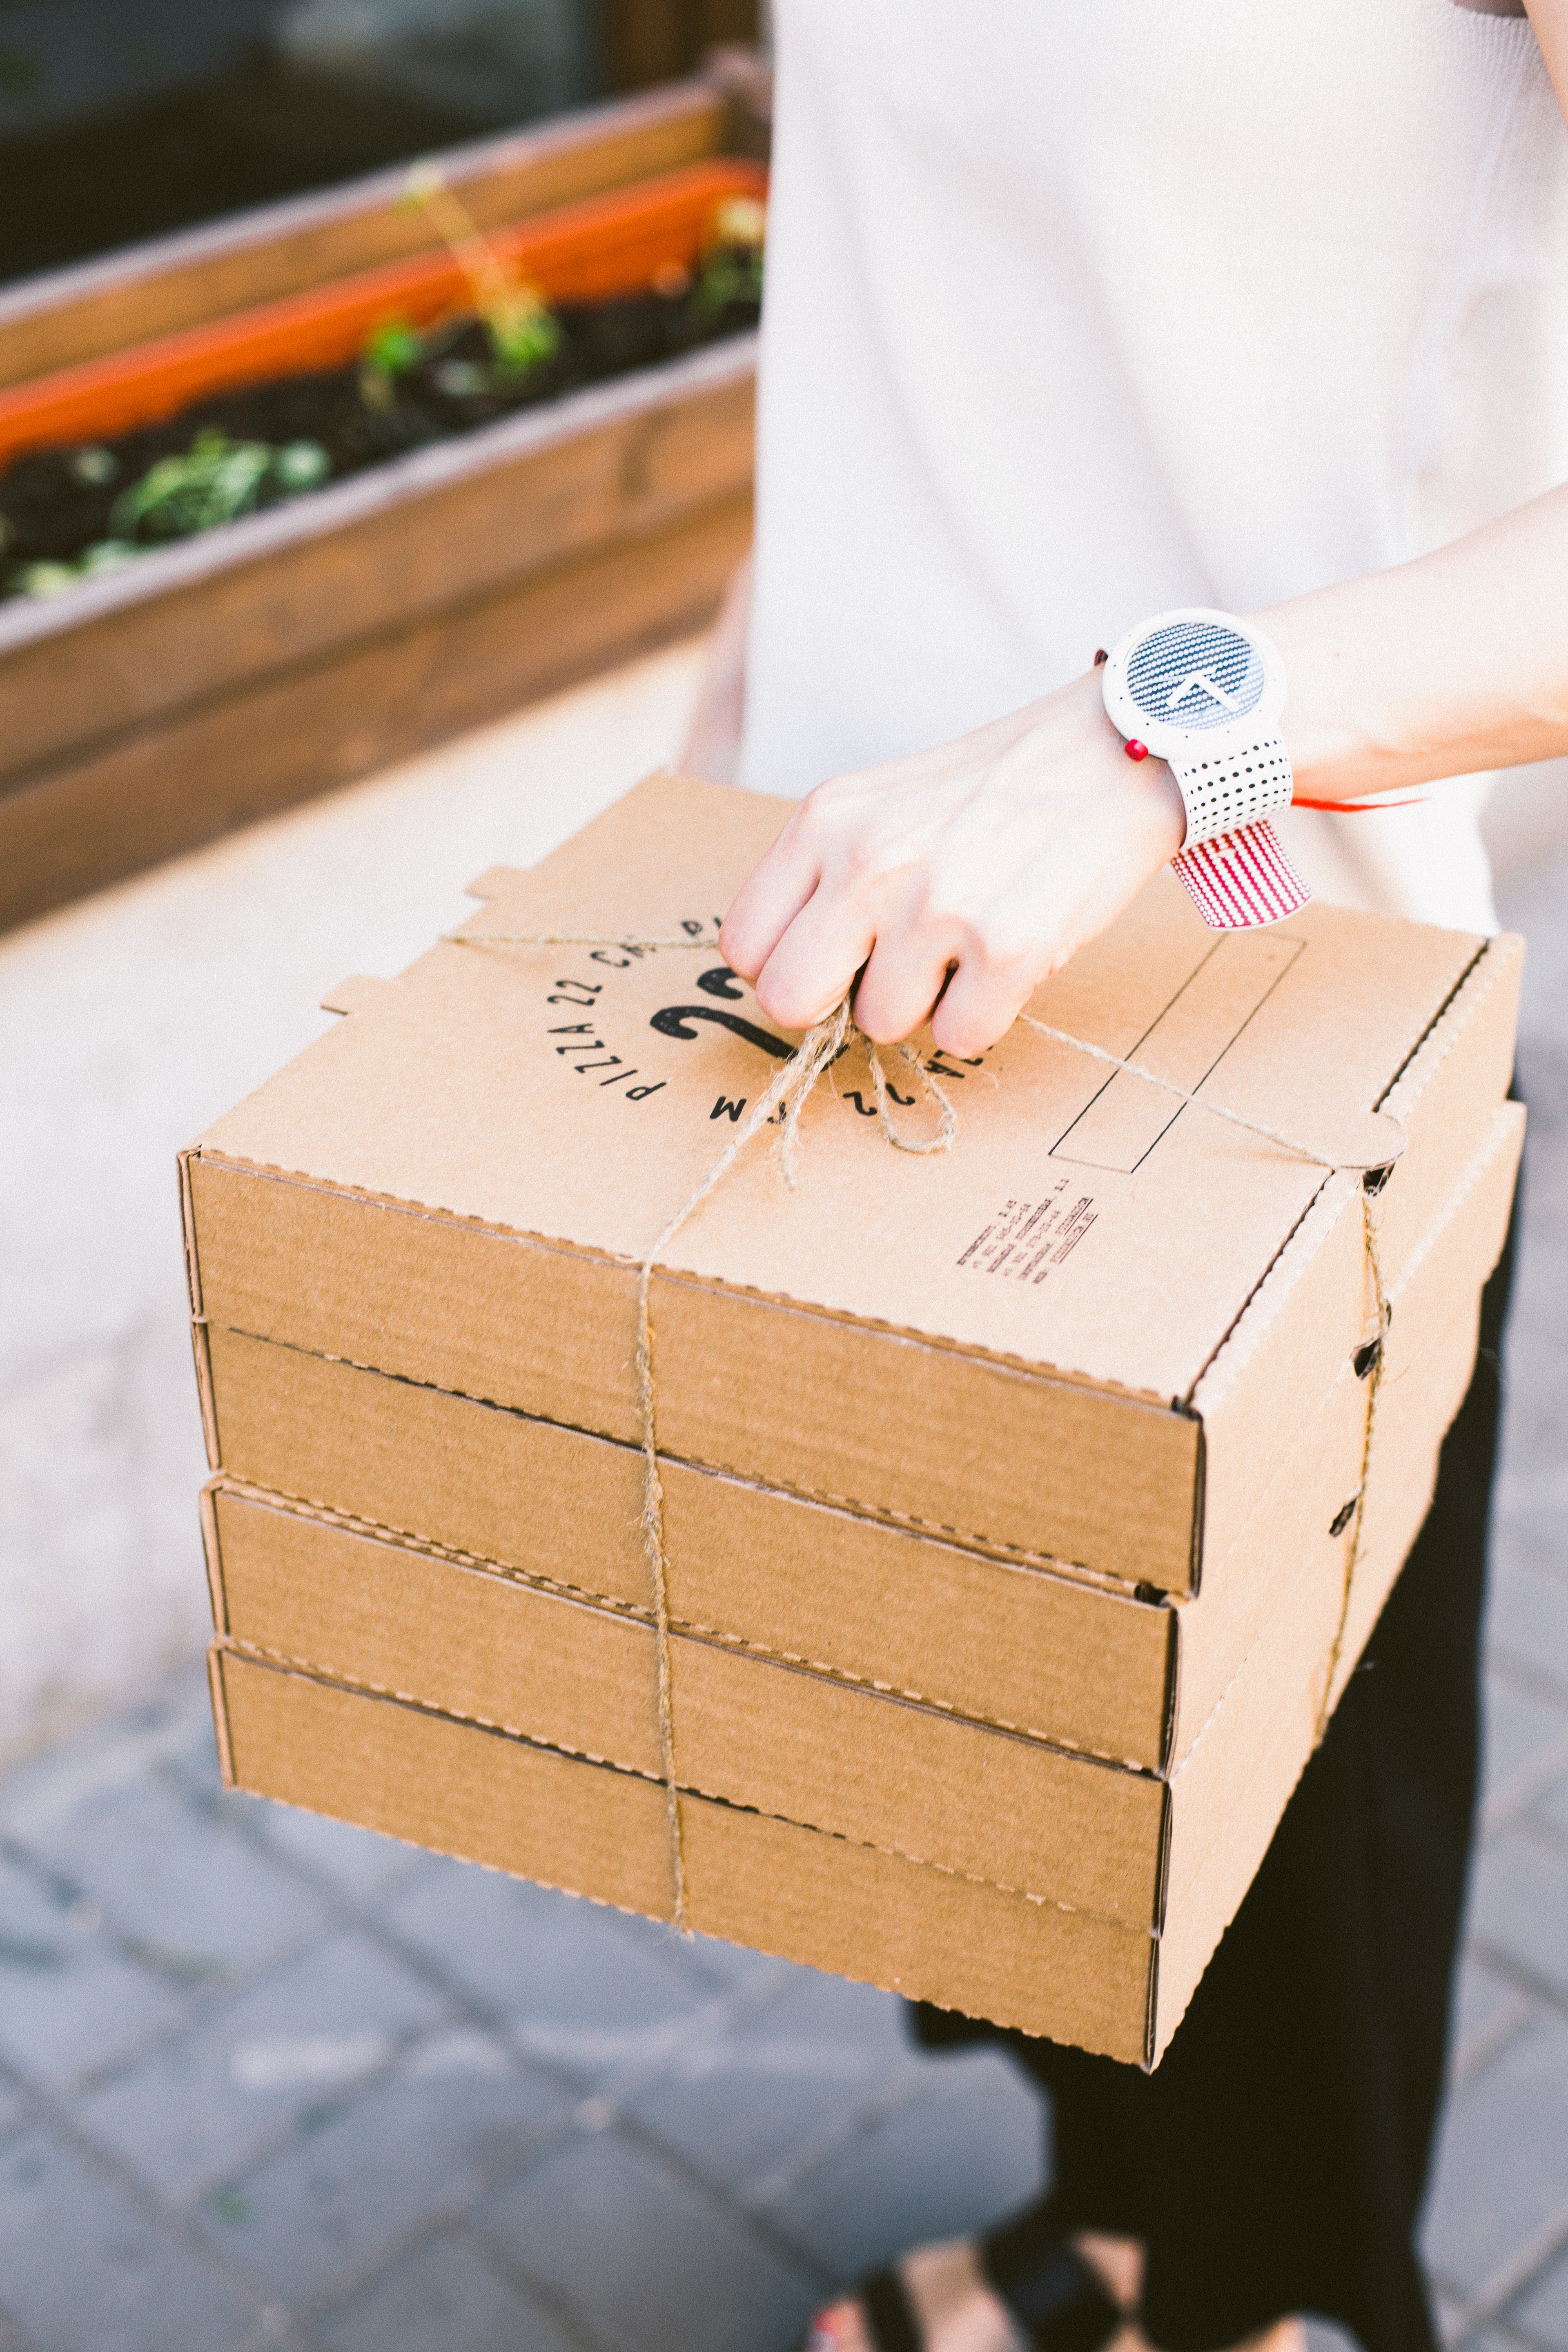 Person in a white shirt holding a stack of pizza boxes | Photo: Pexels